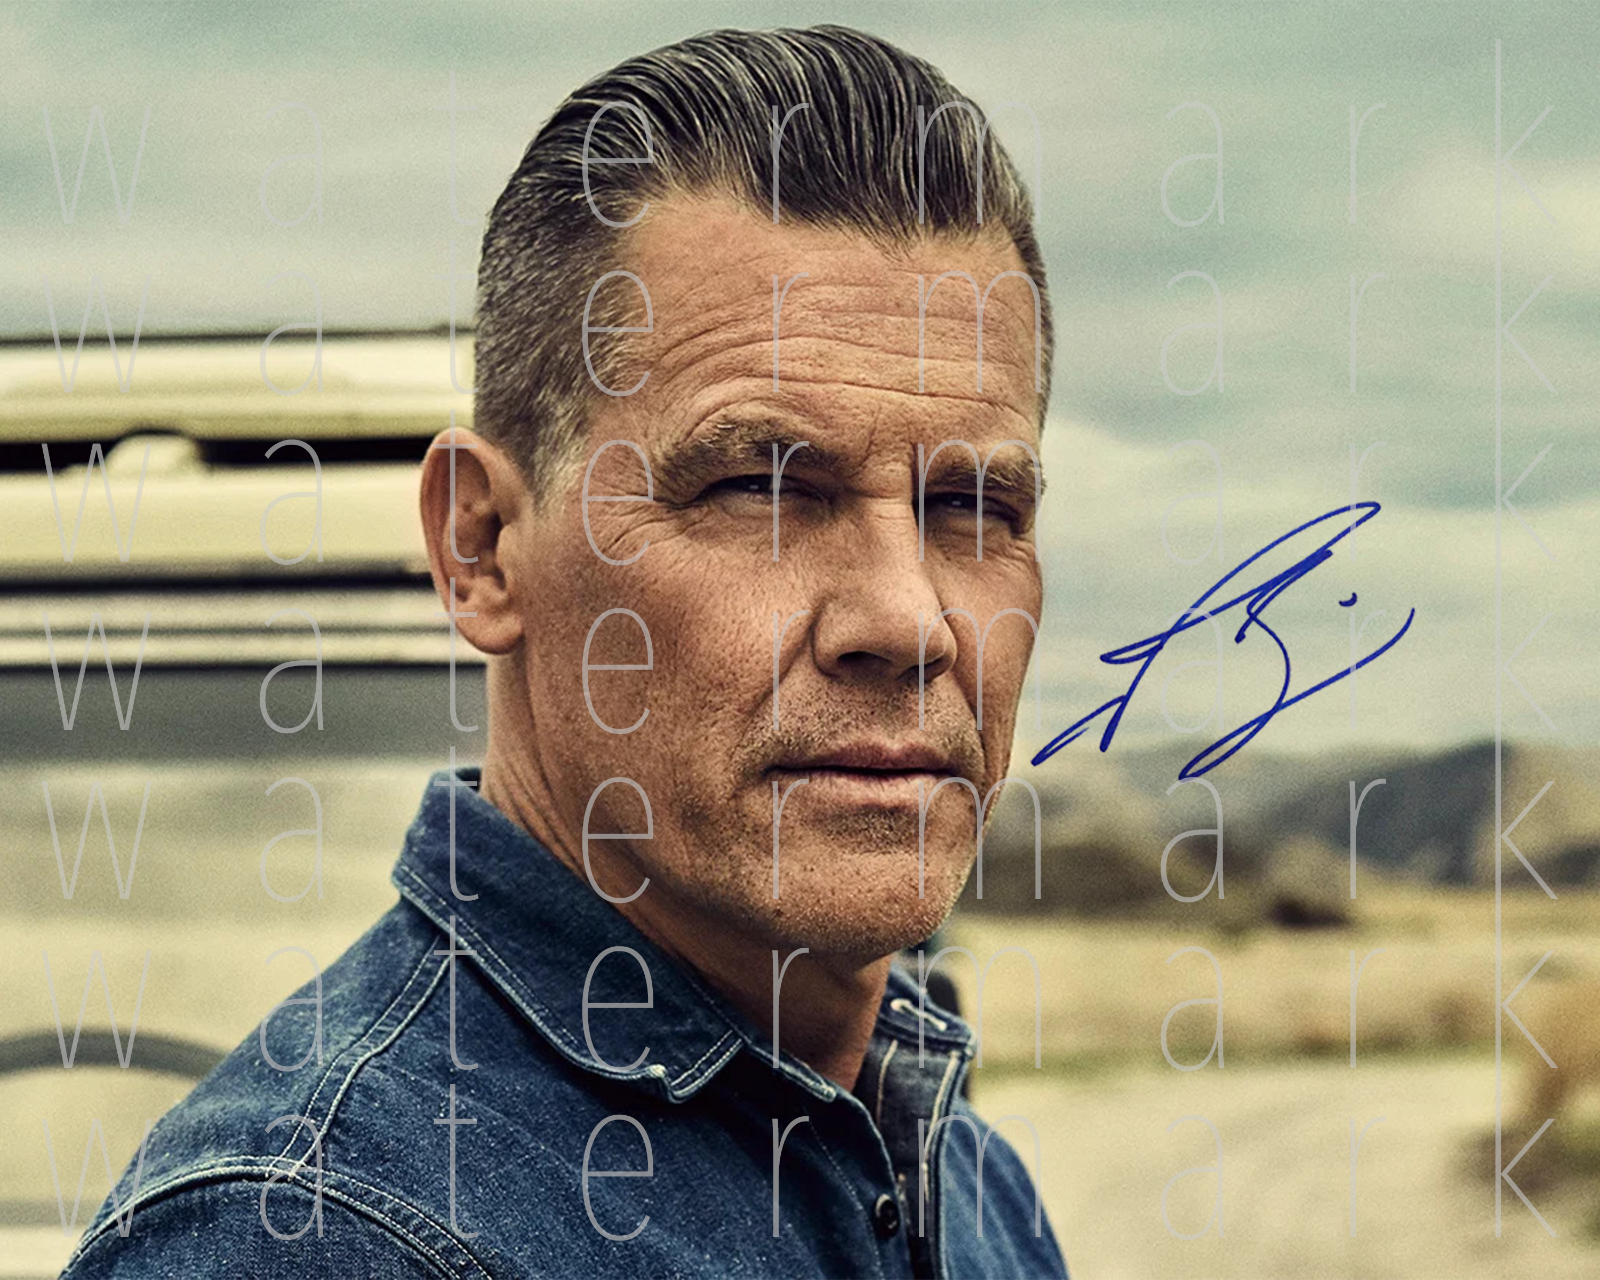 Josh Brolin Thanos Avengers signed 8X10 print poster Photo Poster painting autograph RP